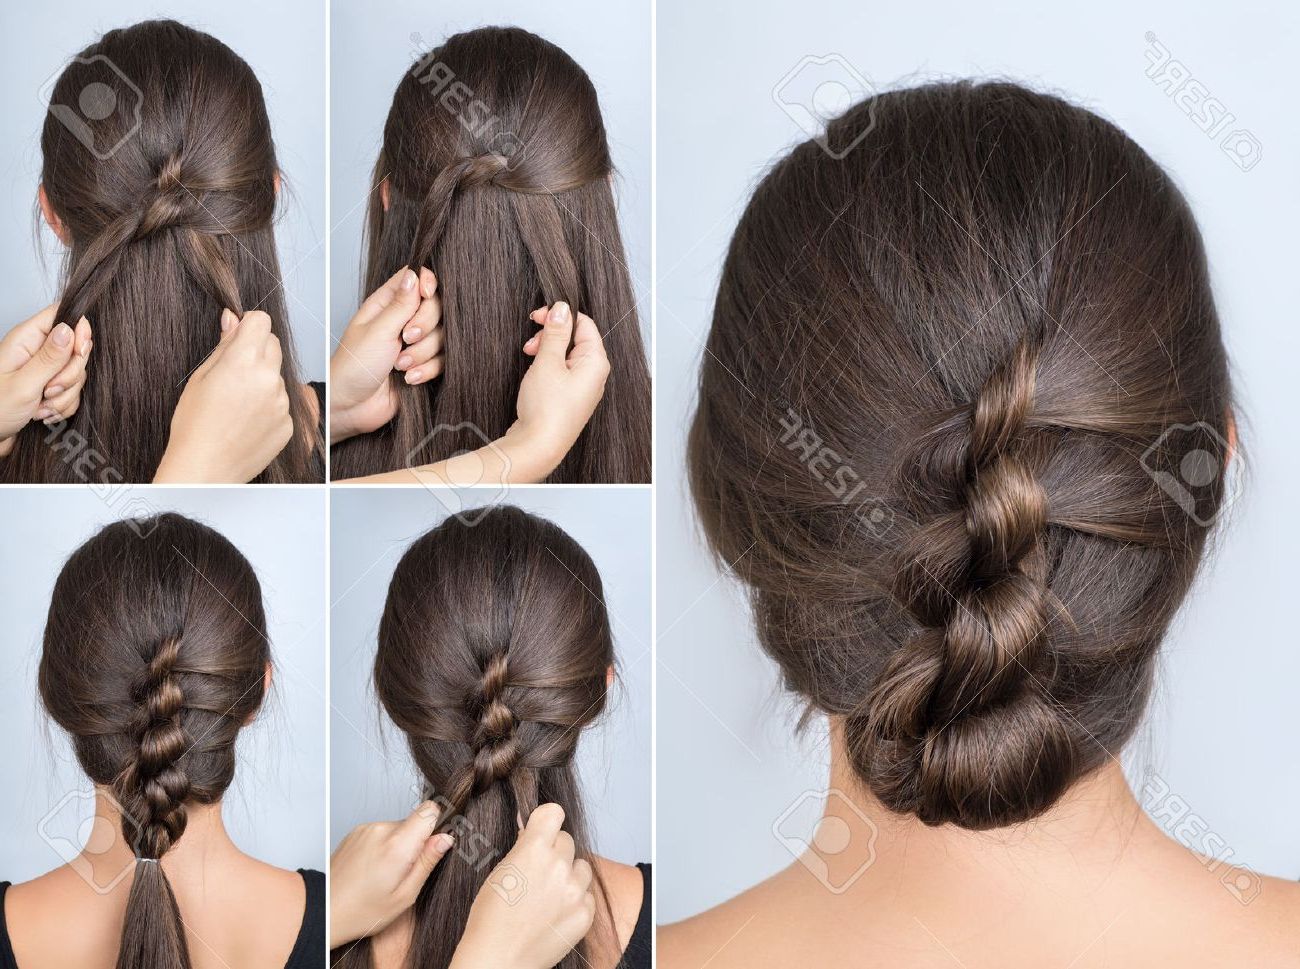 Simple Twisted Hairstyle Tutorial. Easy Hairstyle For Long Hair Inside Newest Simple Pony Updo Hairstyles With A Twist (Gallery 20 of 20)